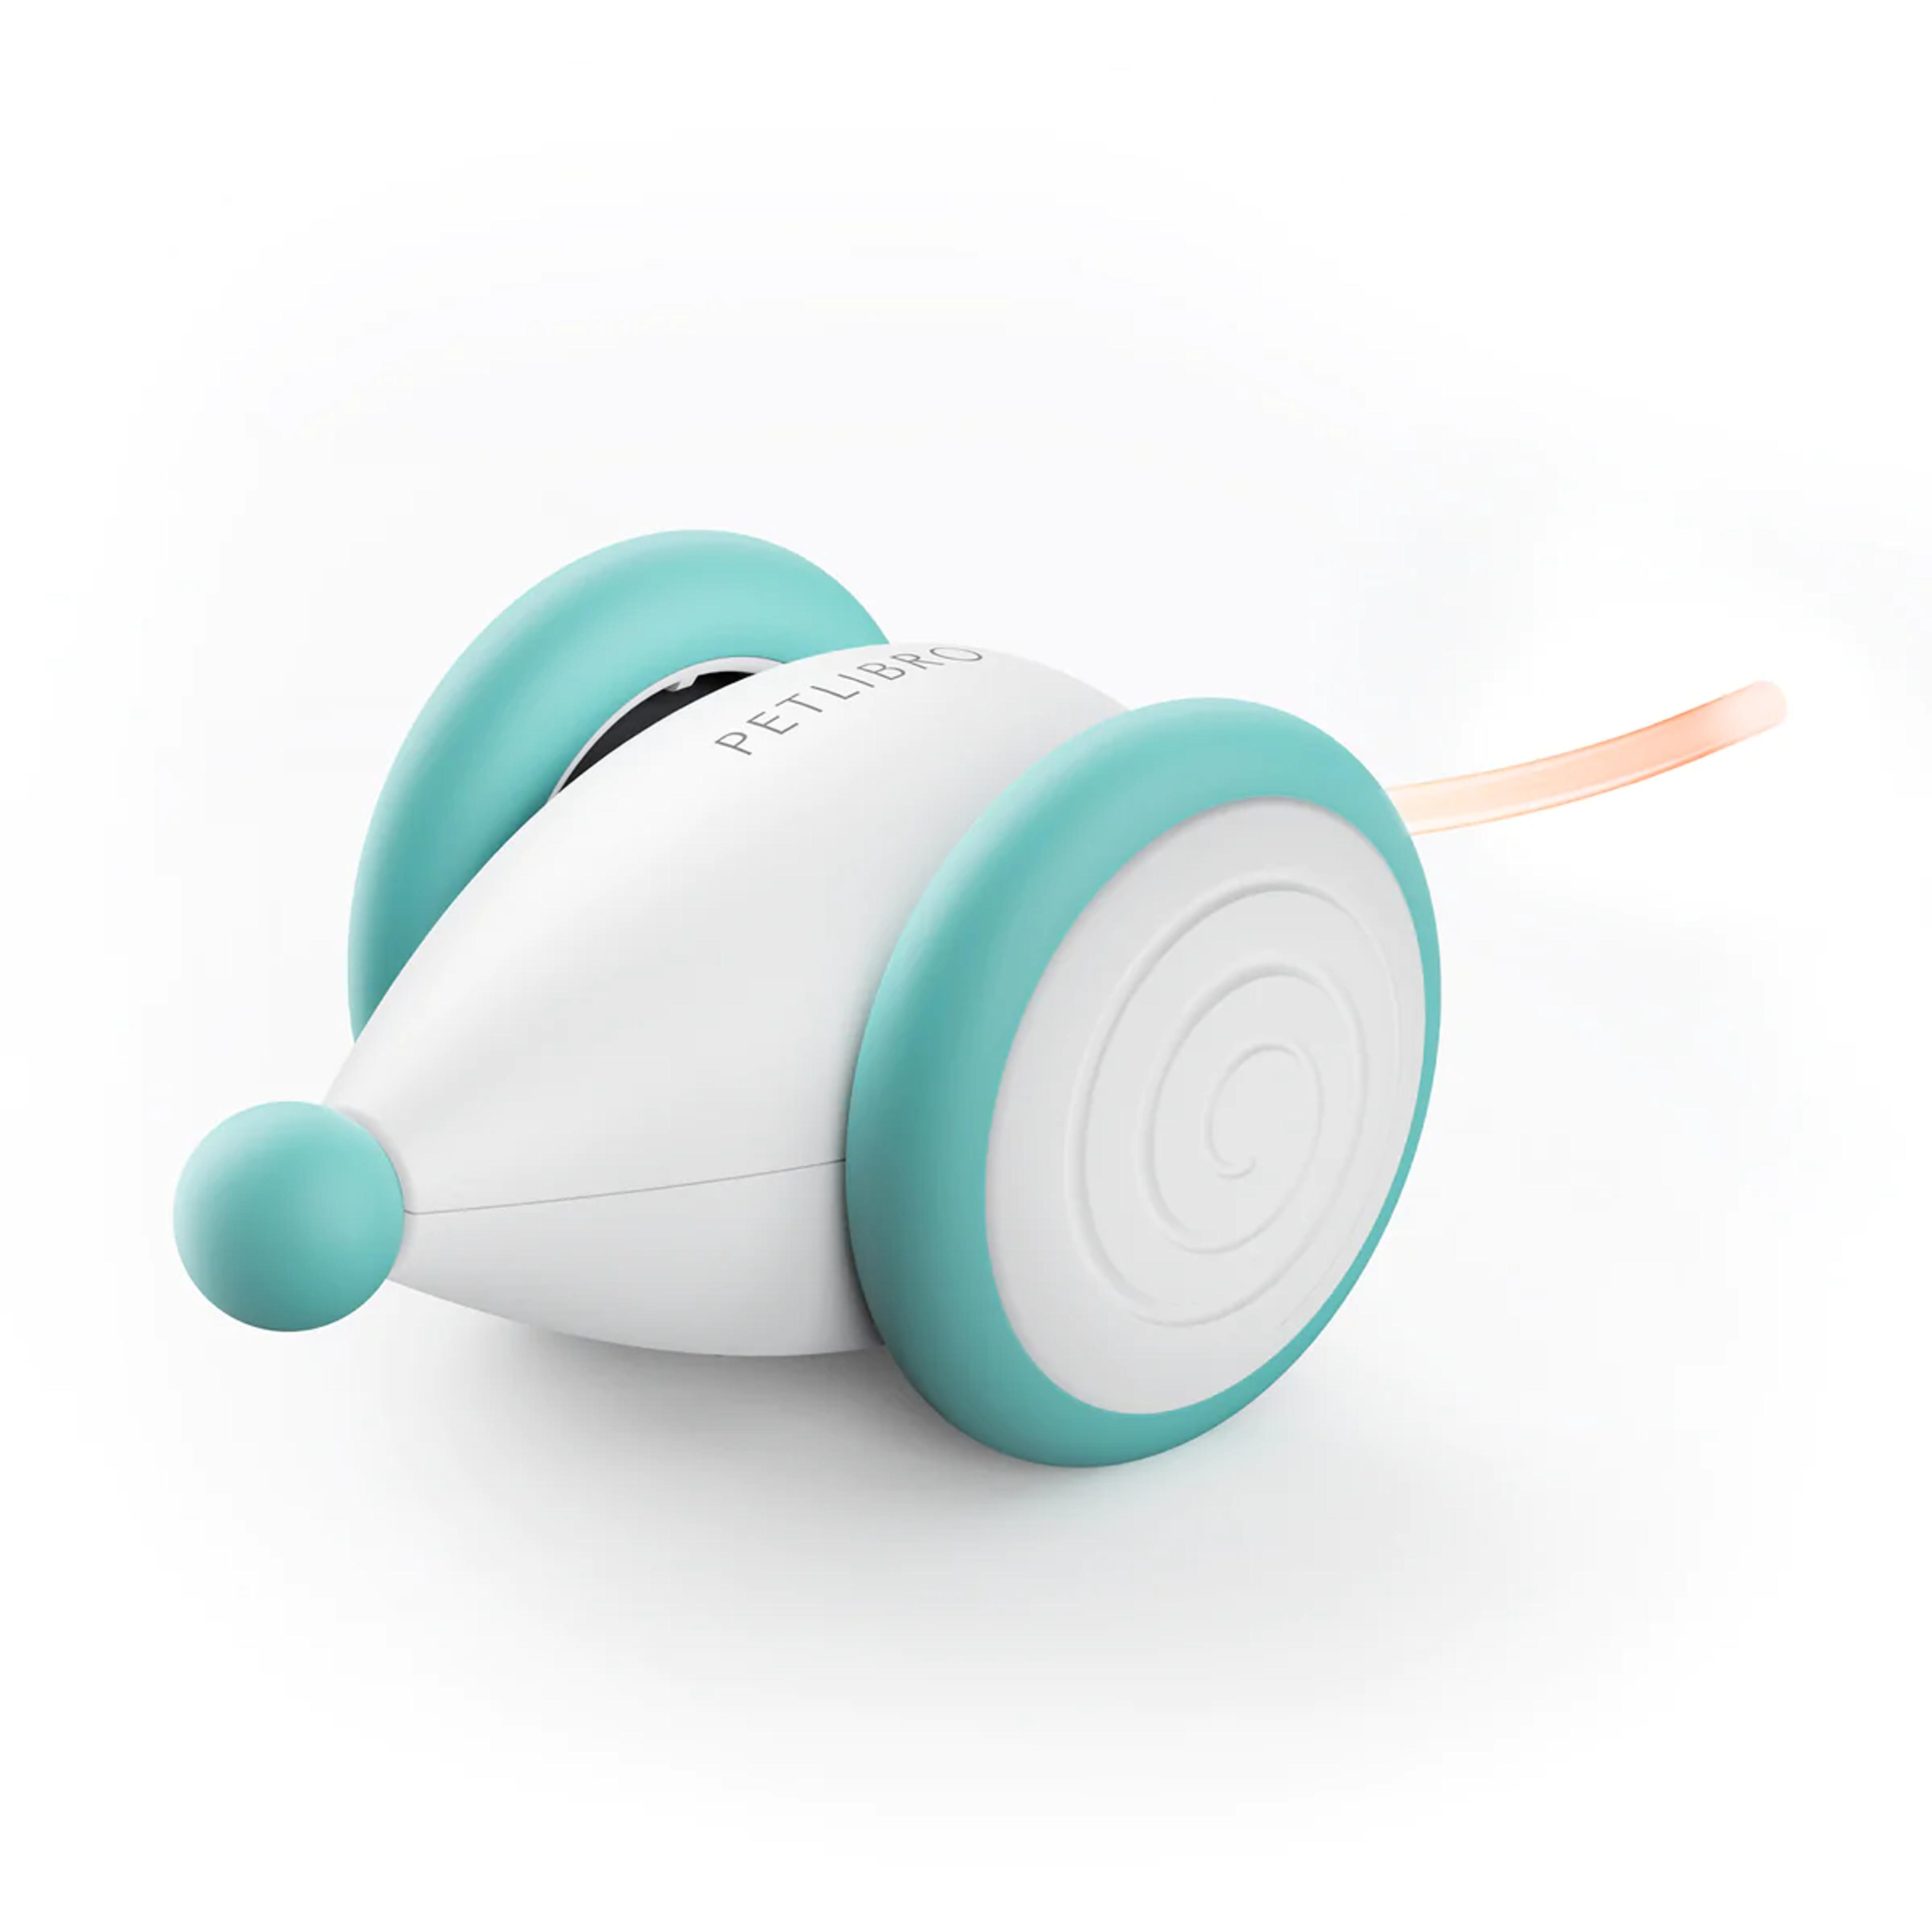 Pixie Mouse Interactive Toy